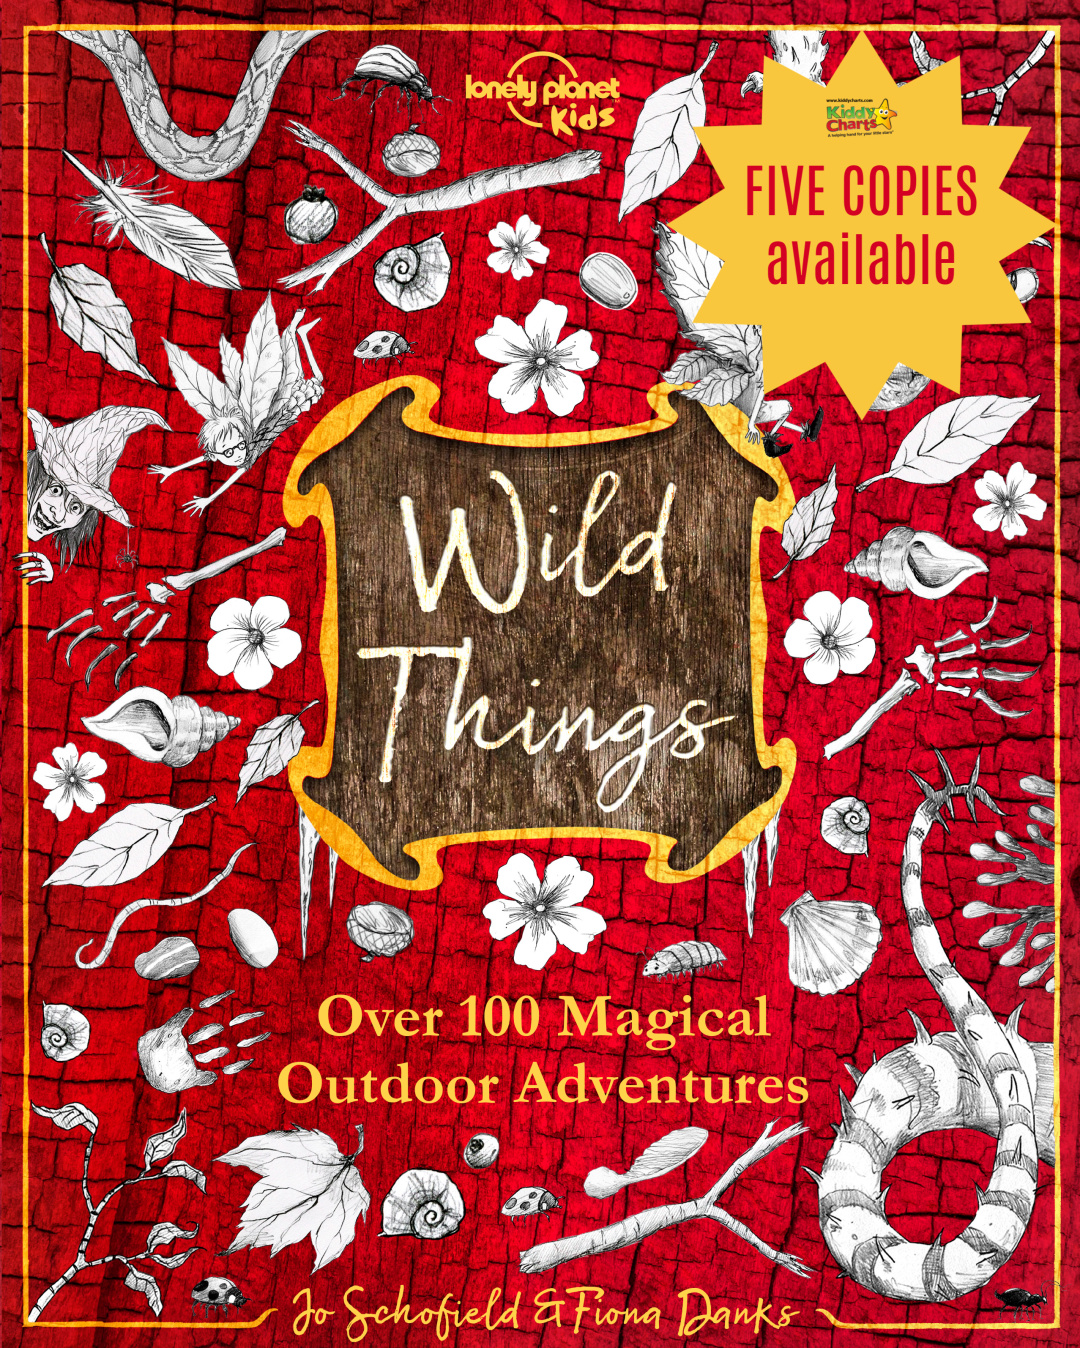 We have FIVE copies of the Wild Things book to giveaway from Lonely Planet Kids; check the comp and the book out on the site today! #giveaways #books #kids #win #prizes